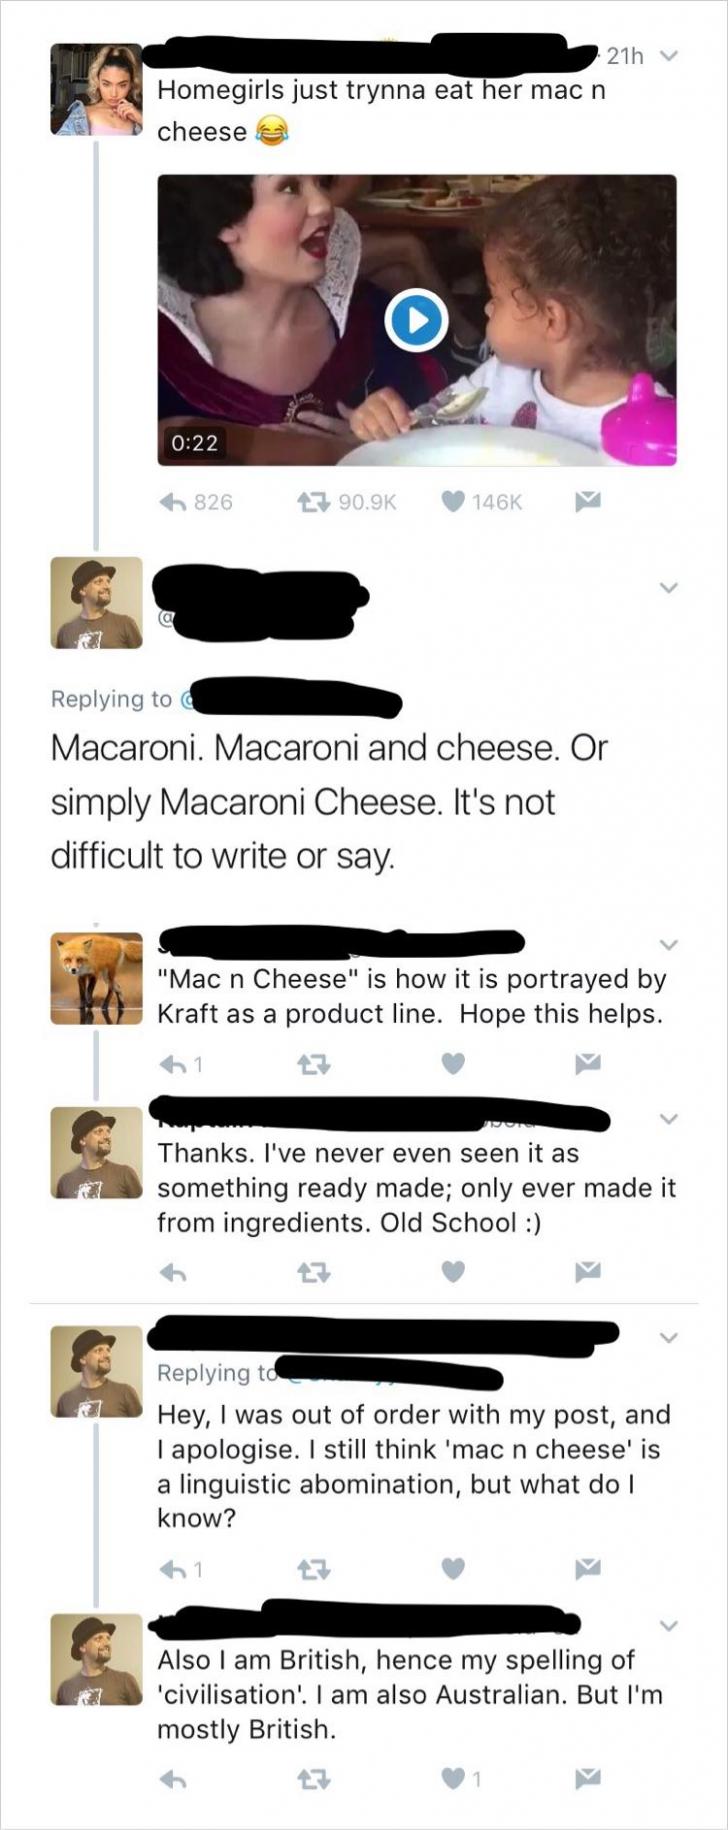 Twitter linguist defends the one true way to phrase "macaroni and cheese".